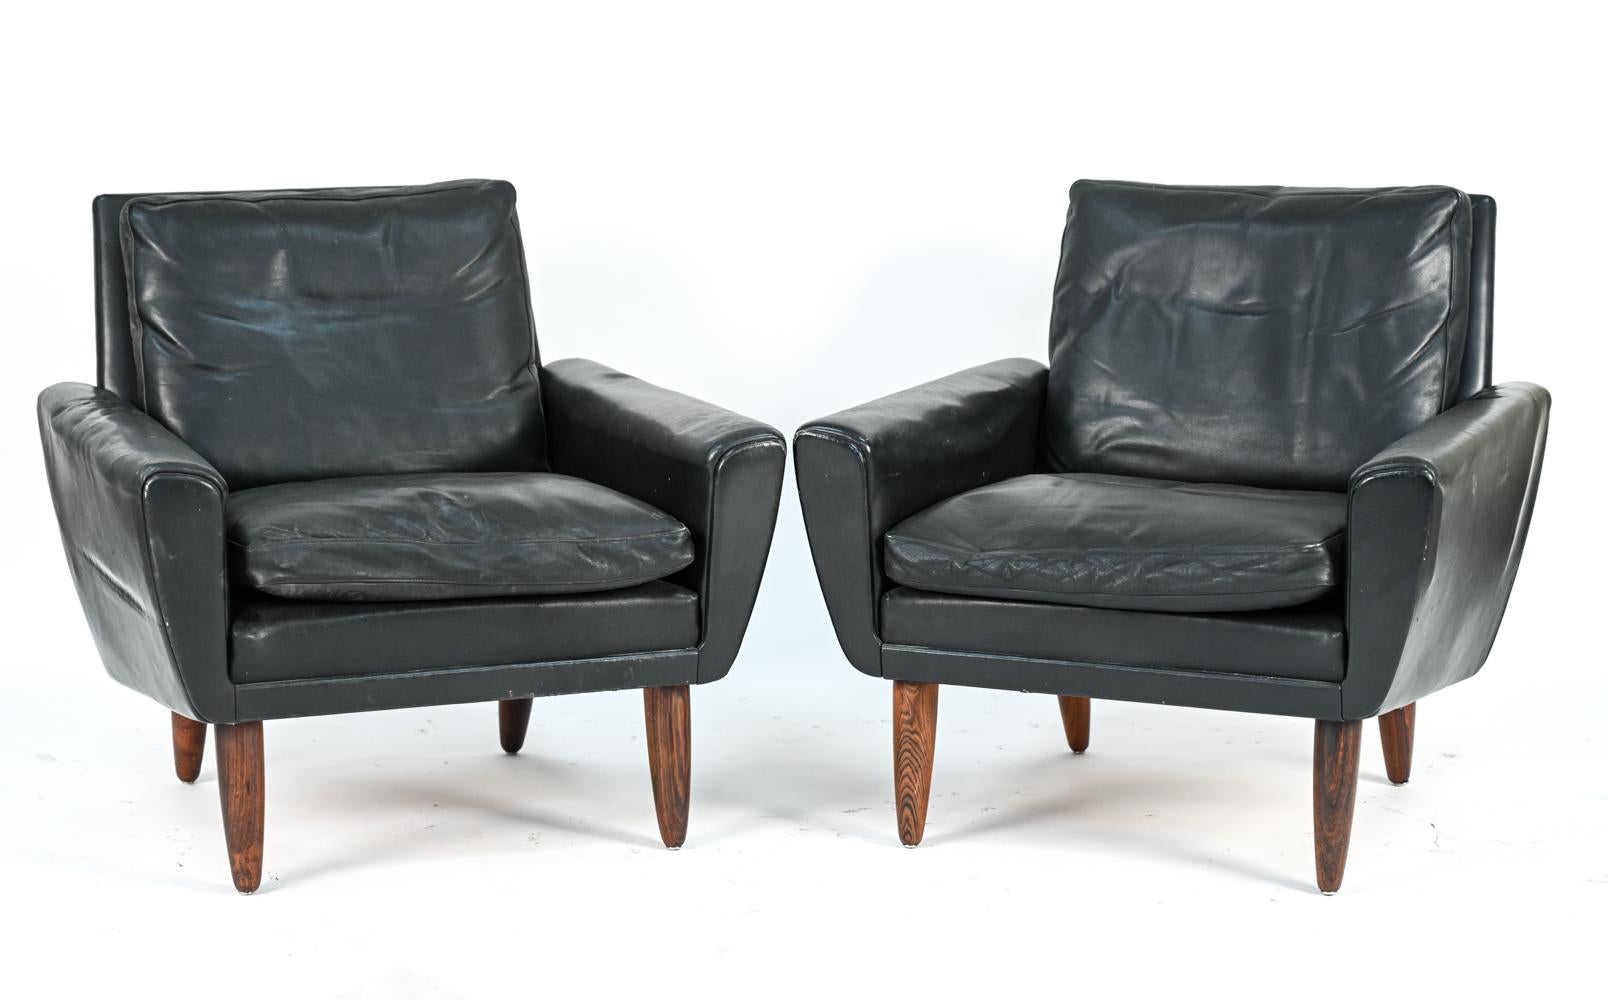 A pair of Danish mid-century lounge chairs in black leather by Tarm, c. 1950.